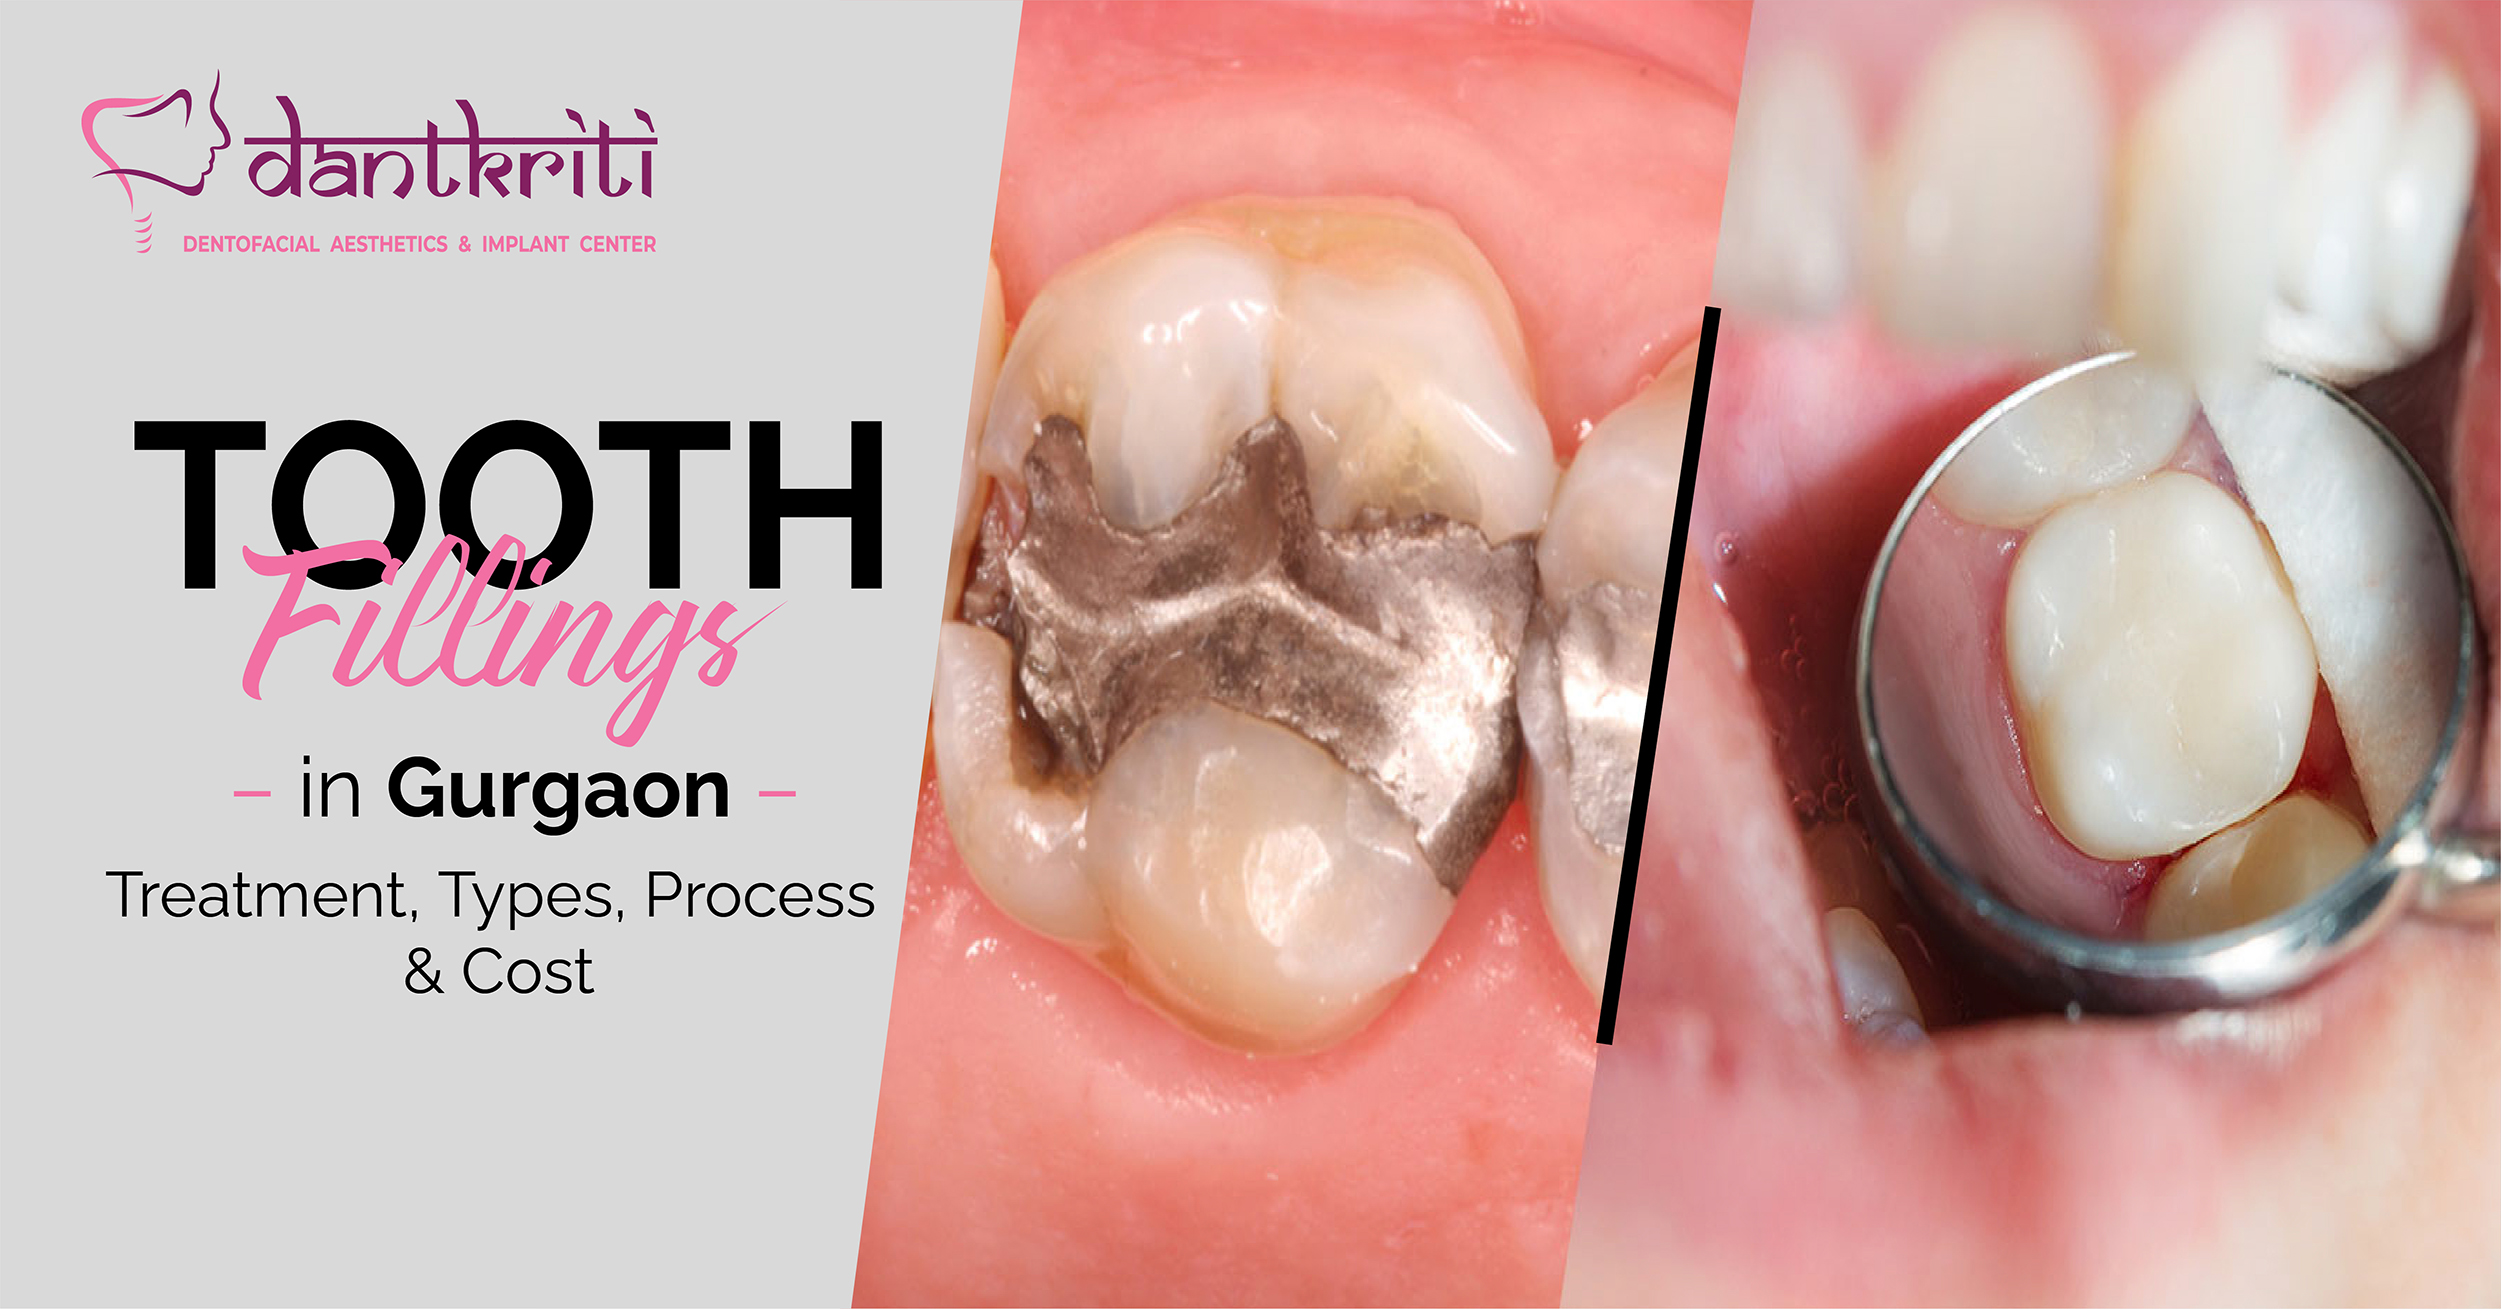 TOOTH FILLINGS IN GURGAON: TREATMENT, TYPES, PROCESS & COST